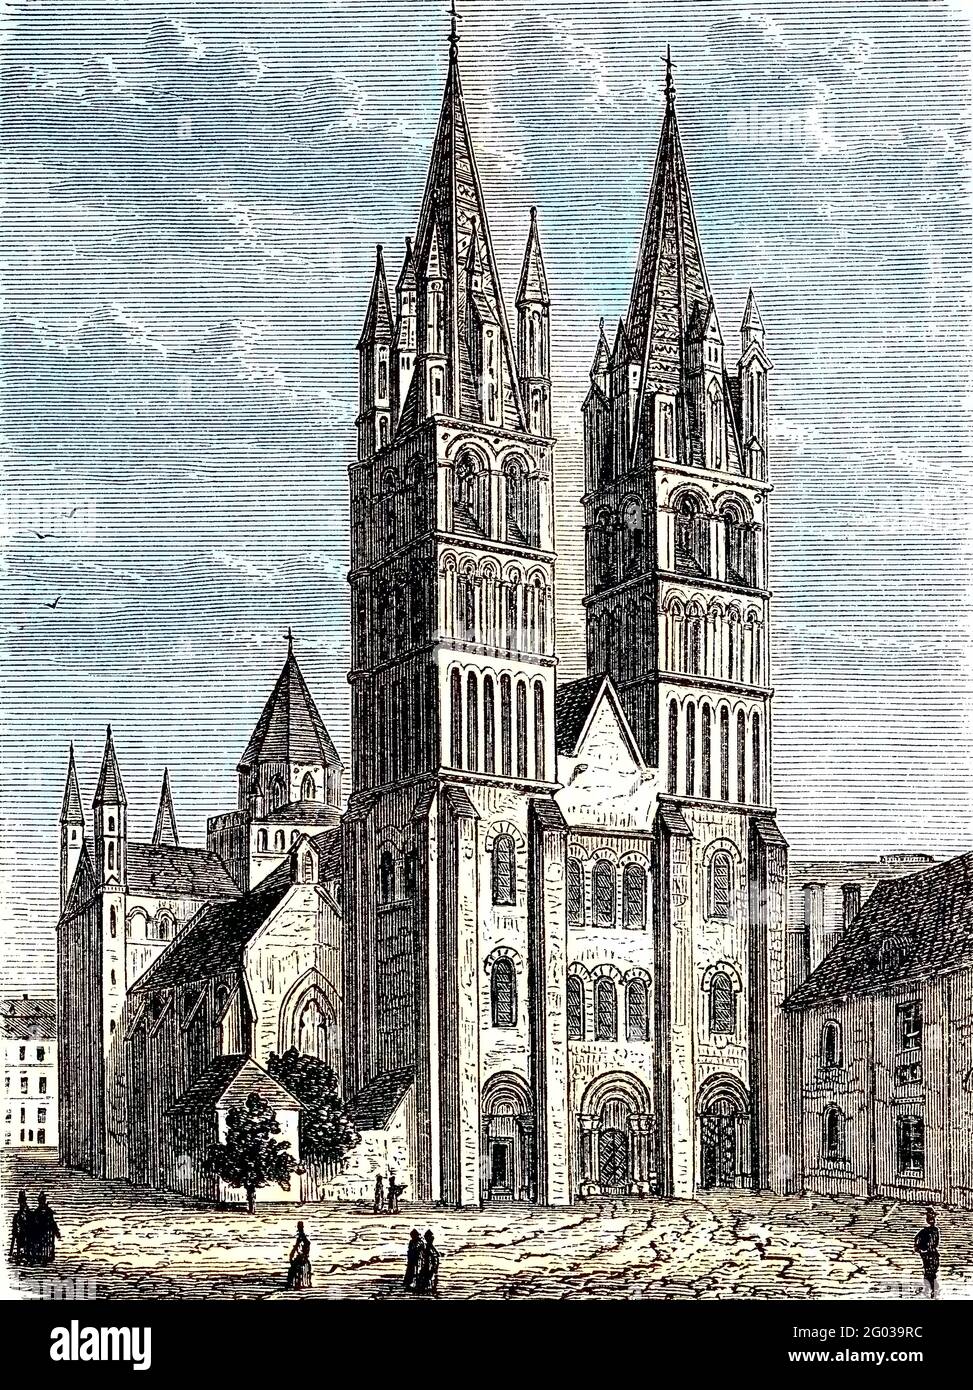 Cathedral of St. Stephen in Caen, burial place of William the Conqueror, Normandy, France, in 1870  /  Kathedrale St. Stephan in Caen, Grabstätte von Wilhelm der Eroberer, Normandie, Frankreich, im Jahre 1870, Historisch, historical, digital improved reproduction of an original from the 19th century / digitale Reproduktion einer Originalvorlage aus dem 19. Jahrhundert, Koloriert, Kolorierung, koloriert, handkoloriert, Hand-colouring, hand coloured, colored Stock Photo